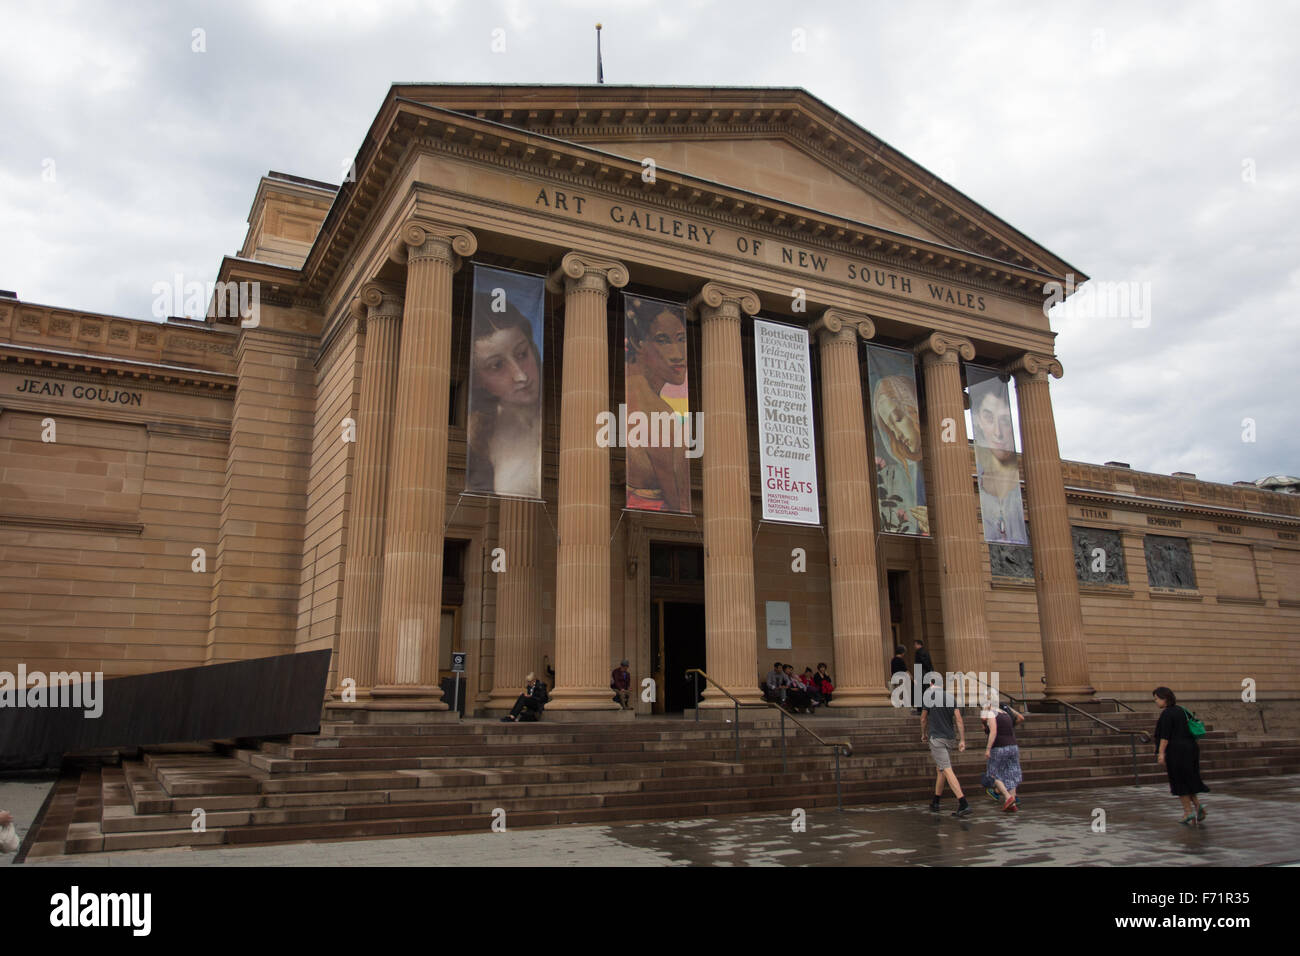 Art Gallery of New South Wales, Sydney Banque D'Images